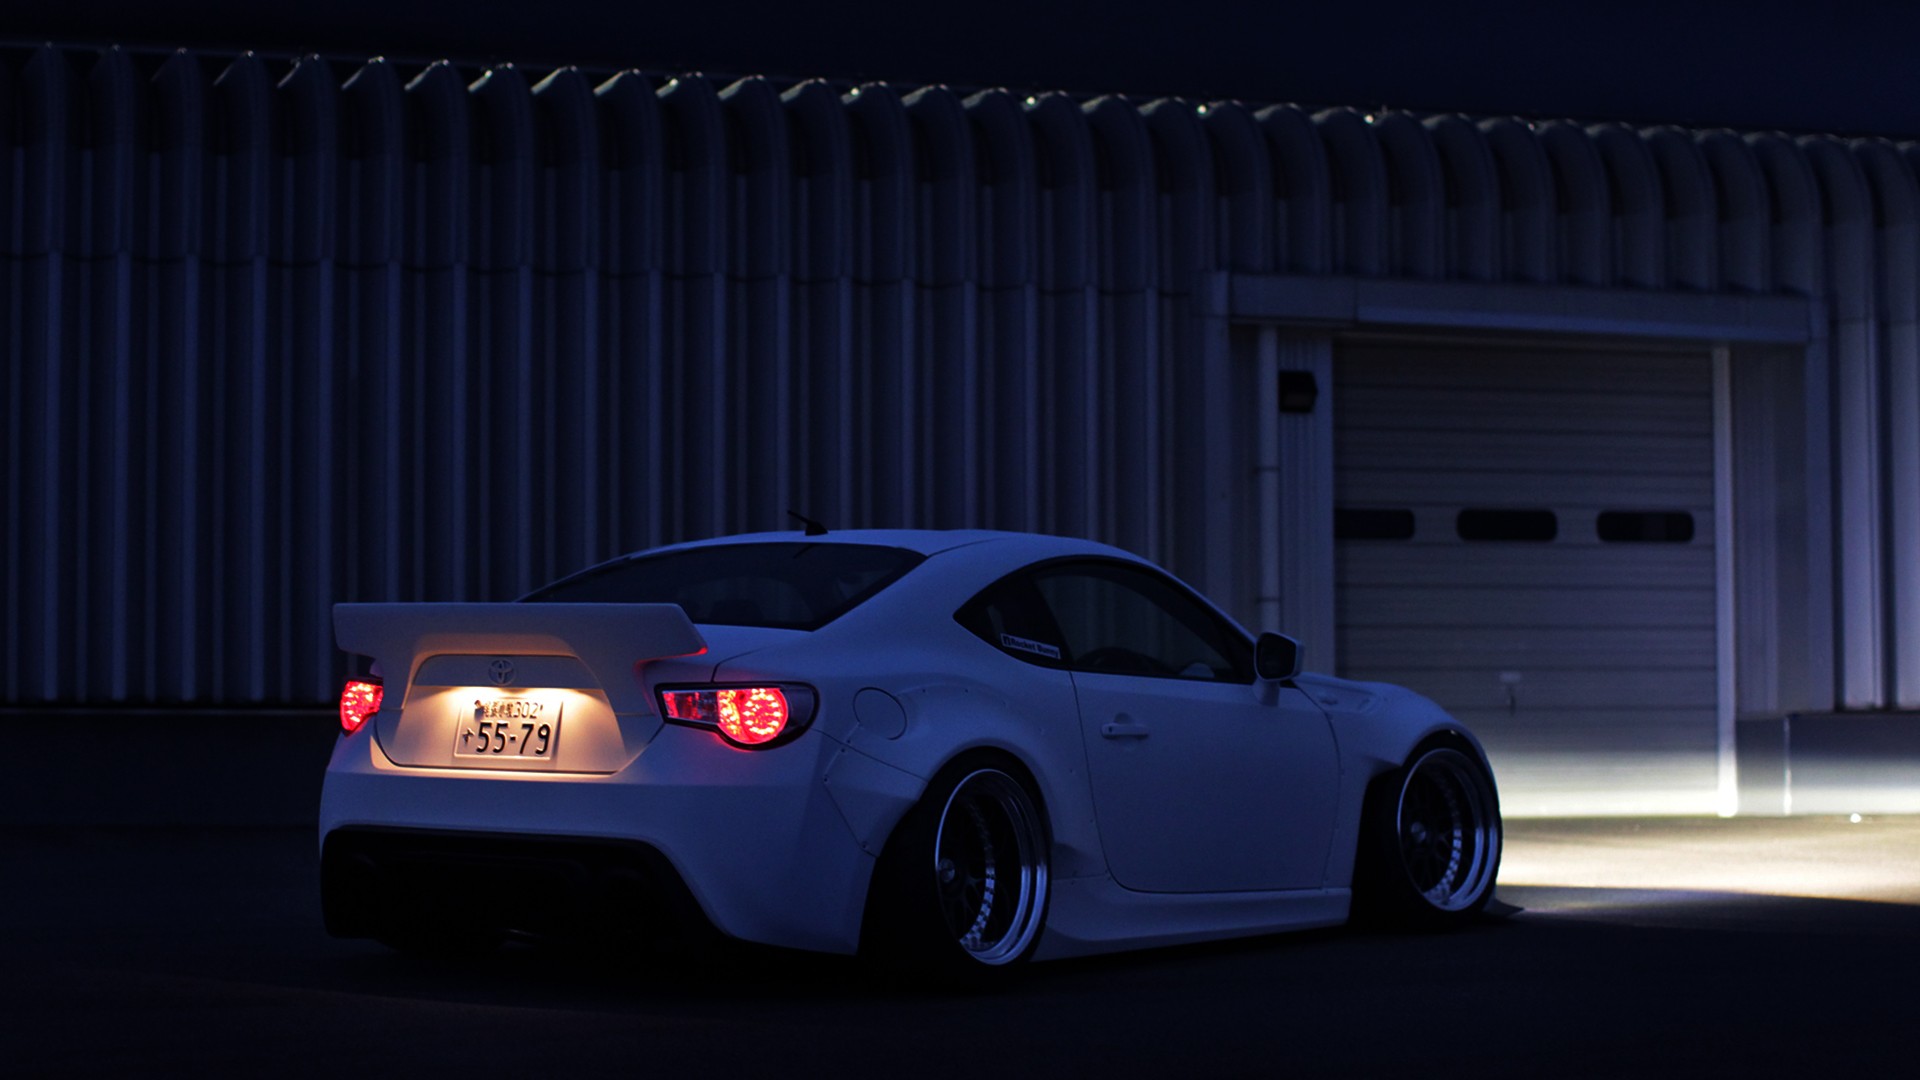 Toyota, Toyota 86, JDM, Japanese Cars, Rocket Bunny Wallpapers HD / Desktop and Mobile Backgrounds